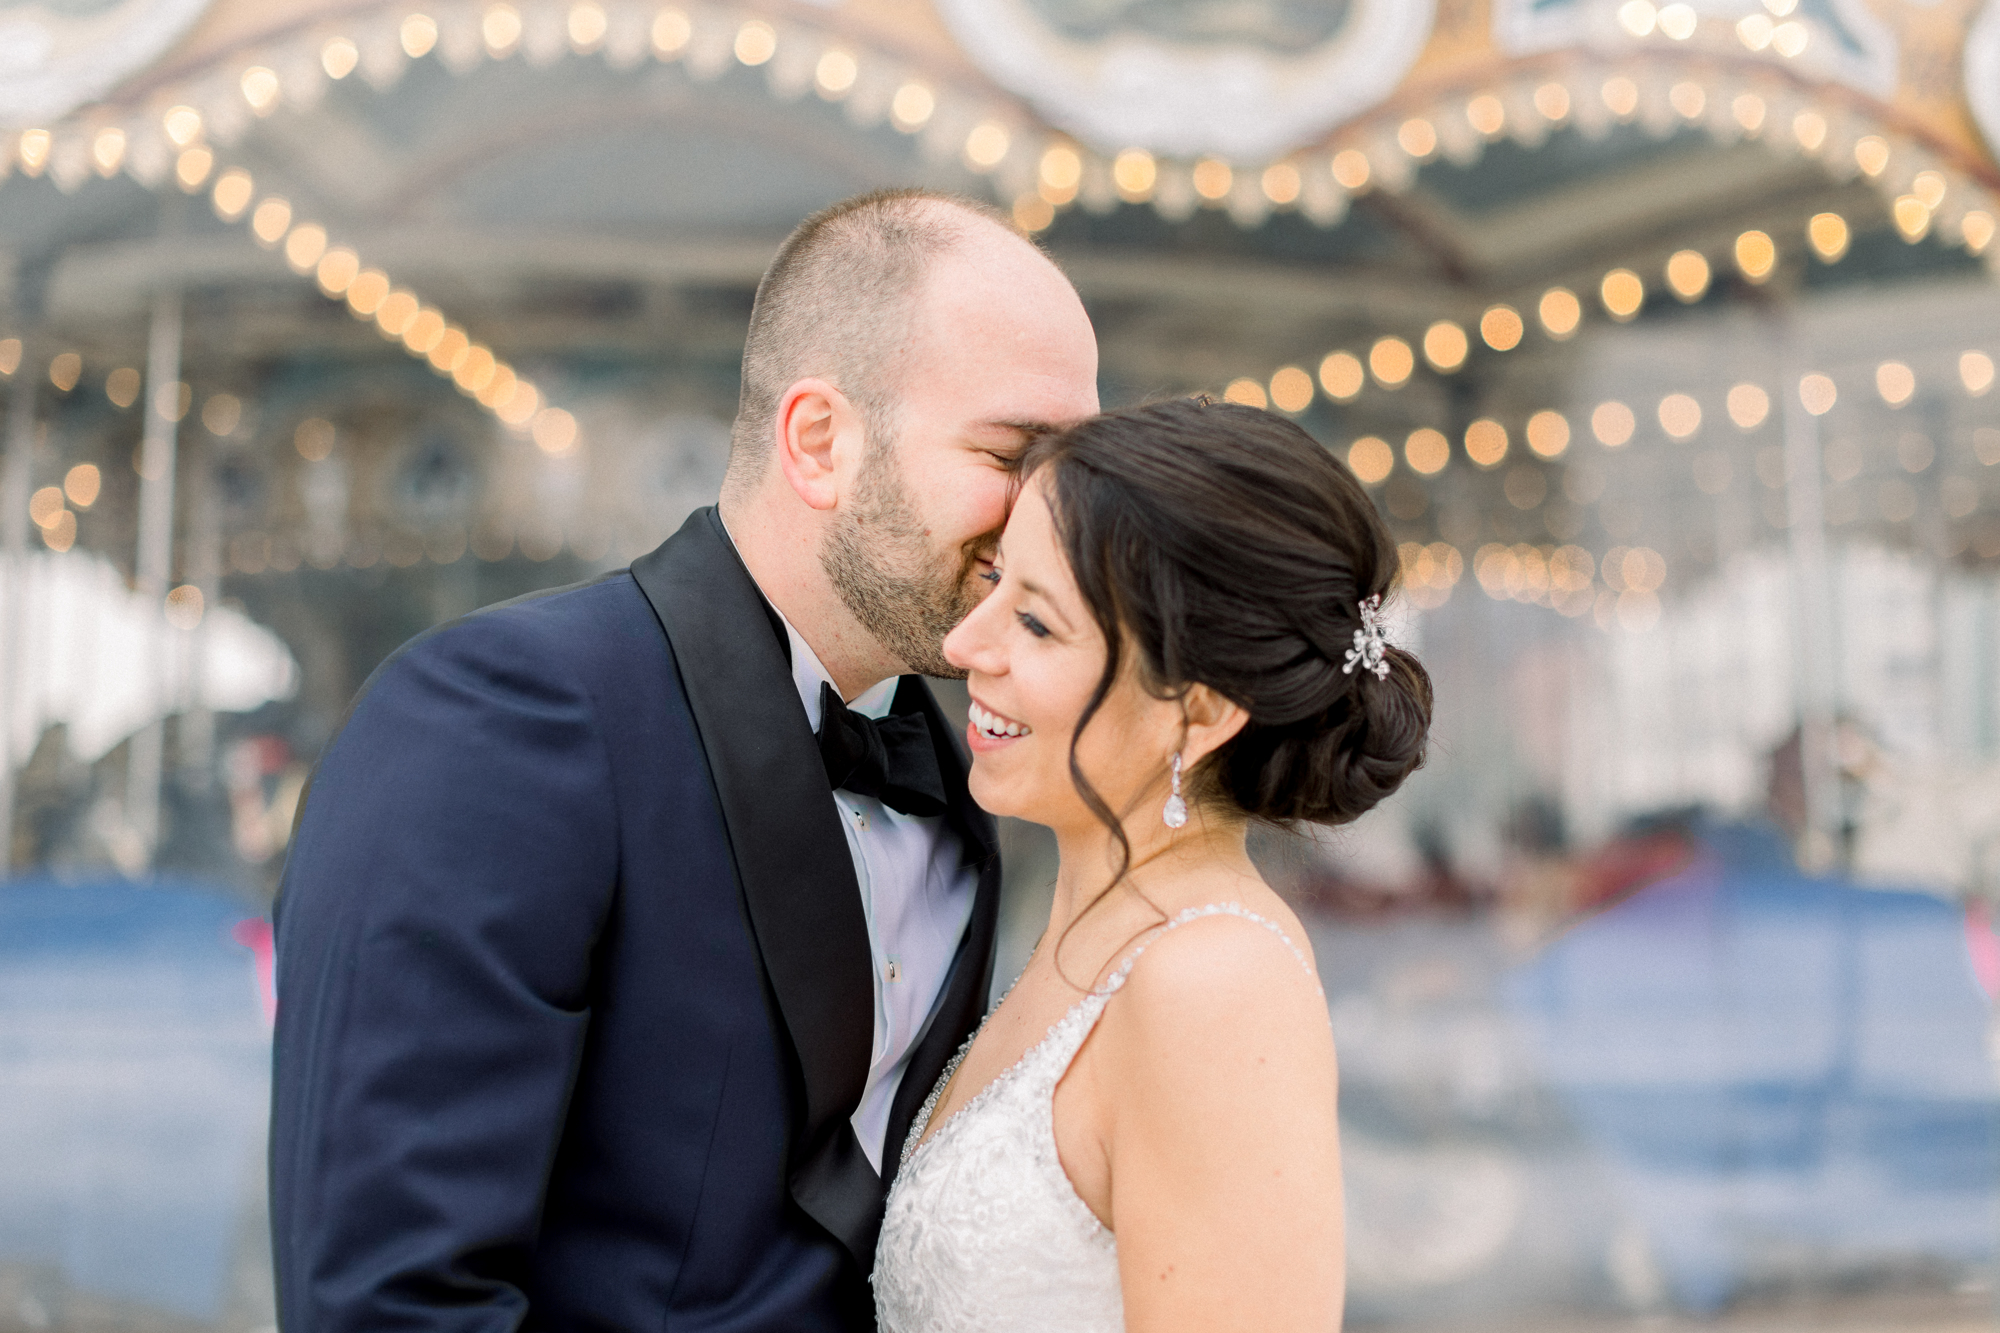 Winter wedding photos at Jane's Carousel in NYC